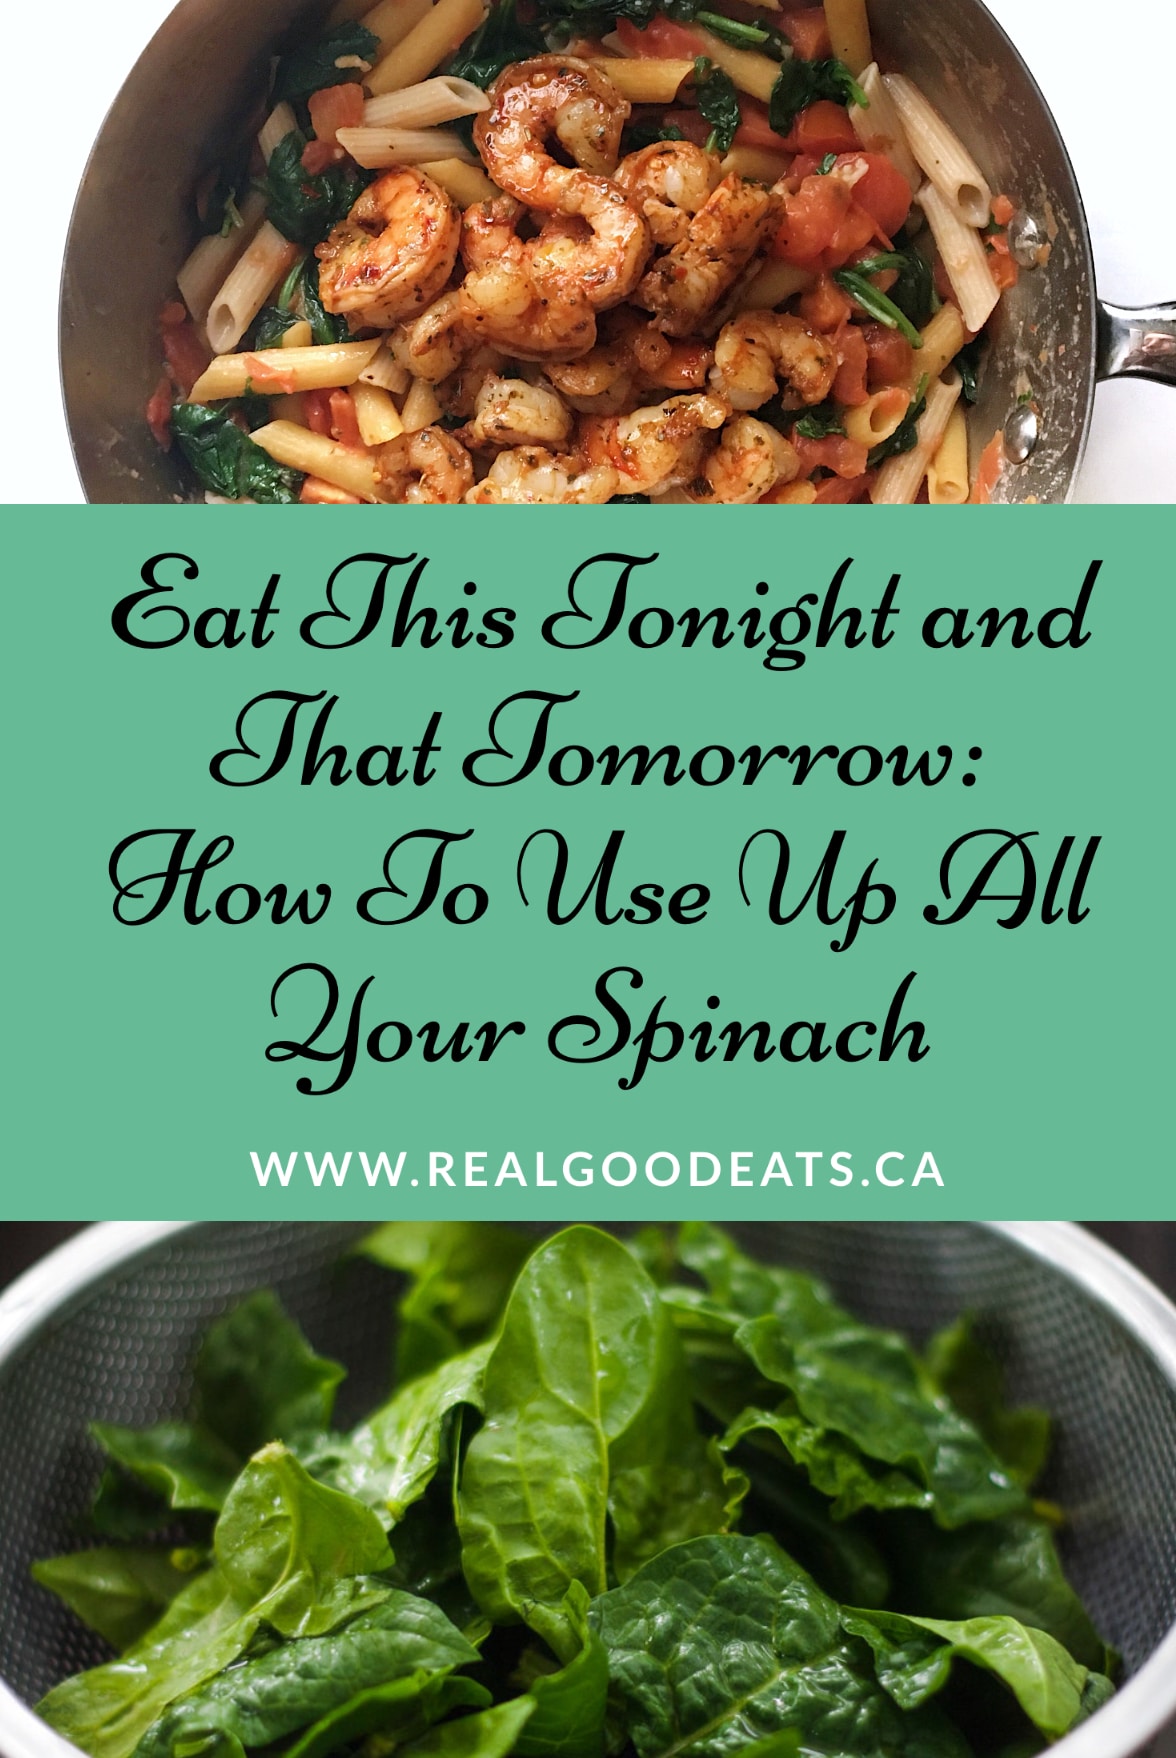 how to use up all your spinach